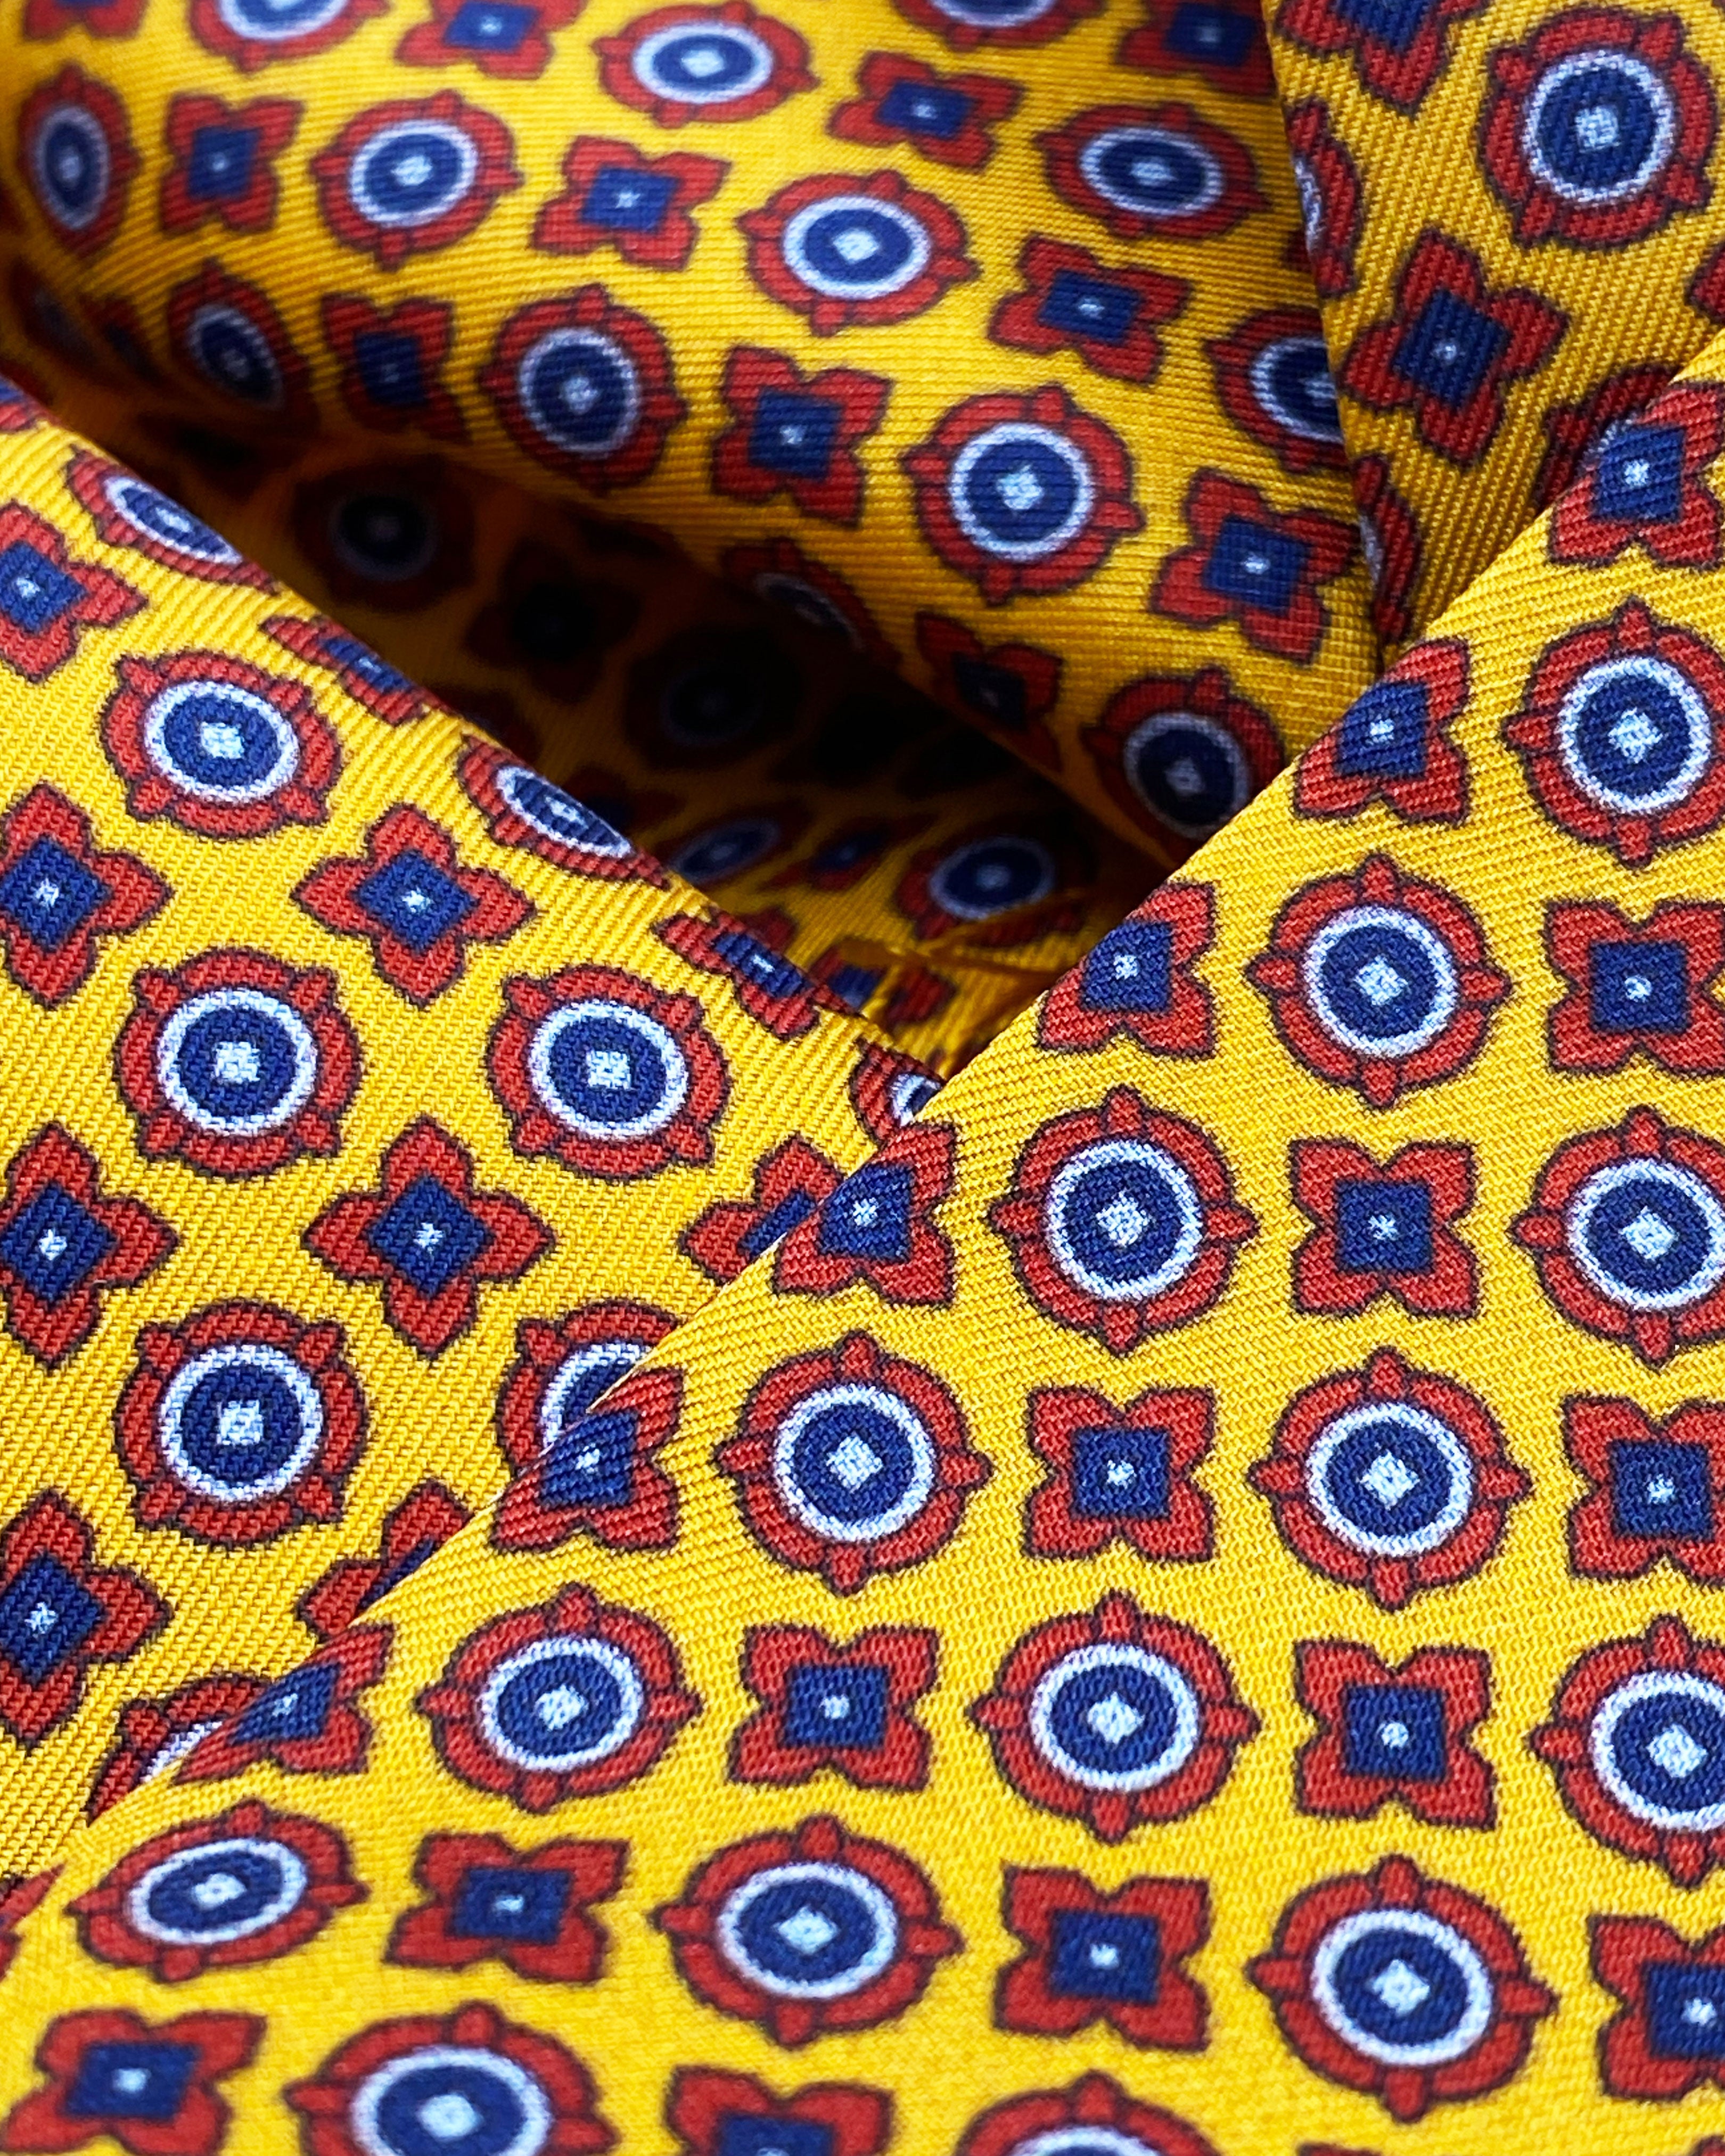 Ruffled close-up view of the Toshima silk pocket square, presenting a closer view of the small blue and red stylised floral patterns on a golden-orange ground.